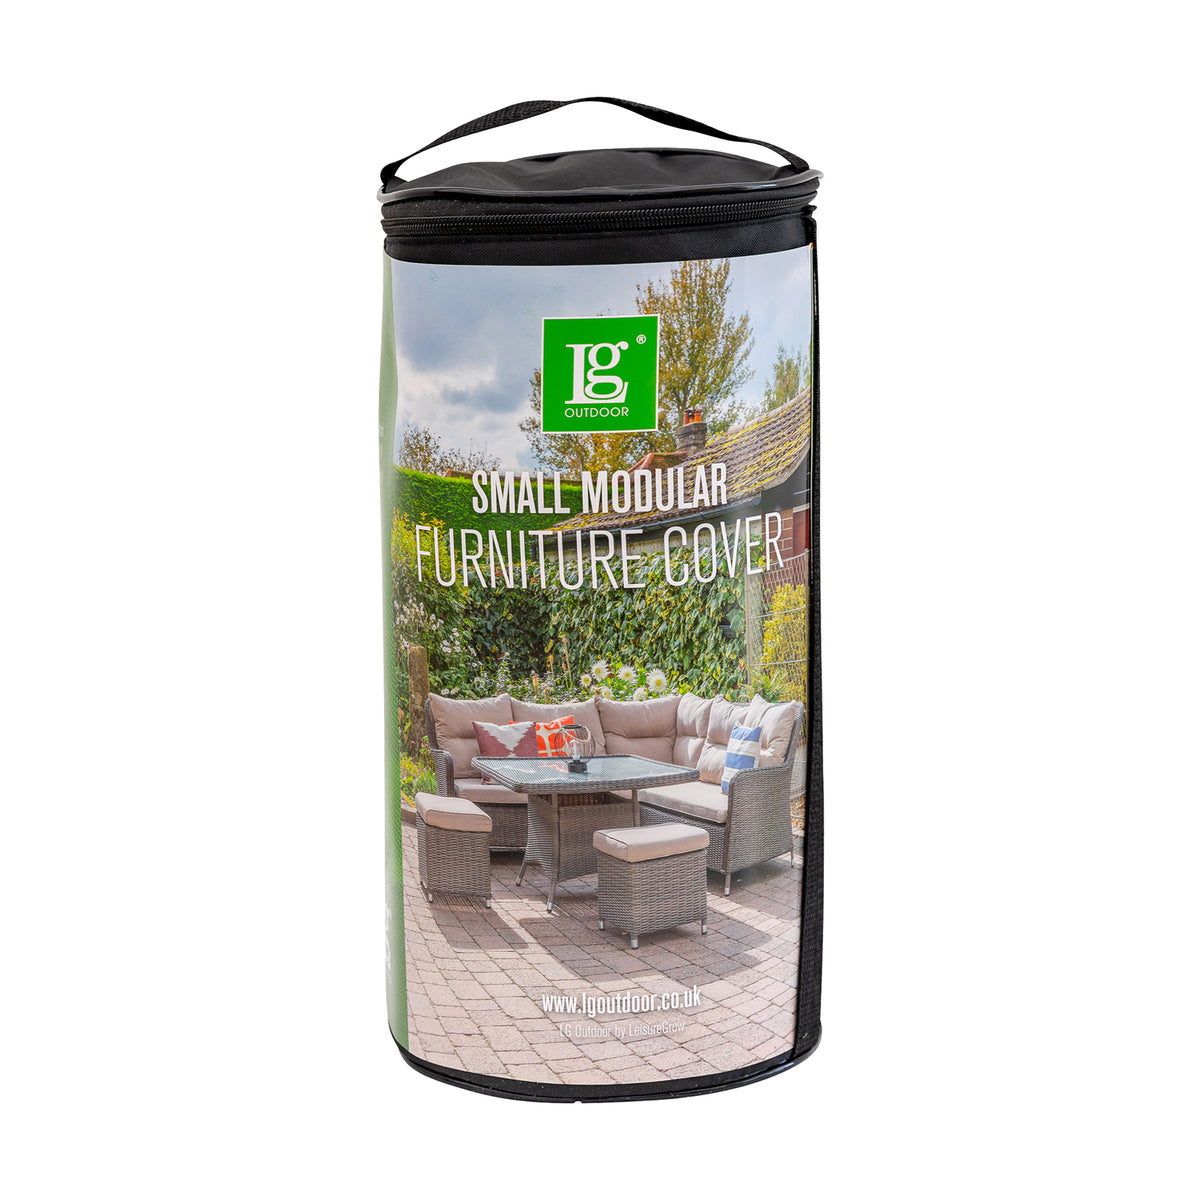 LG Outdoor Small Modular Set Deluxe Cover